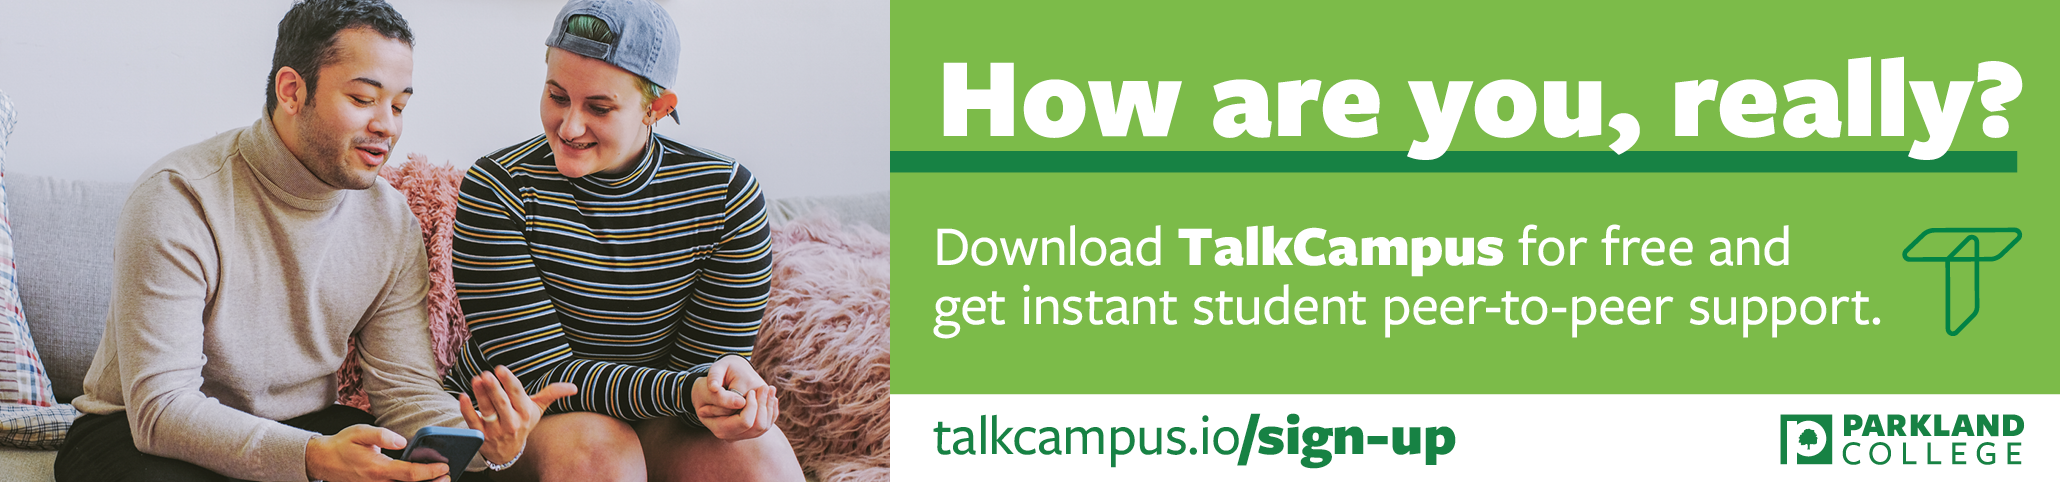 How are you, really? Download Talk Campus for free for instant peer-to-peer support.